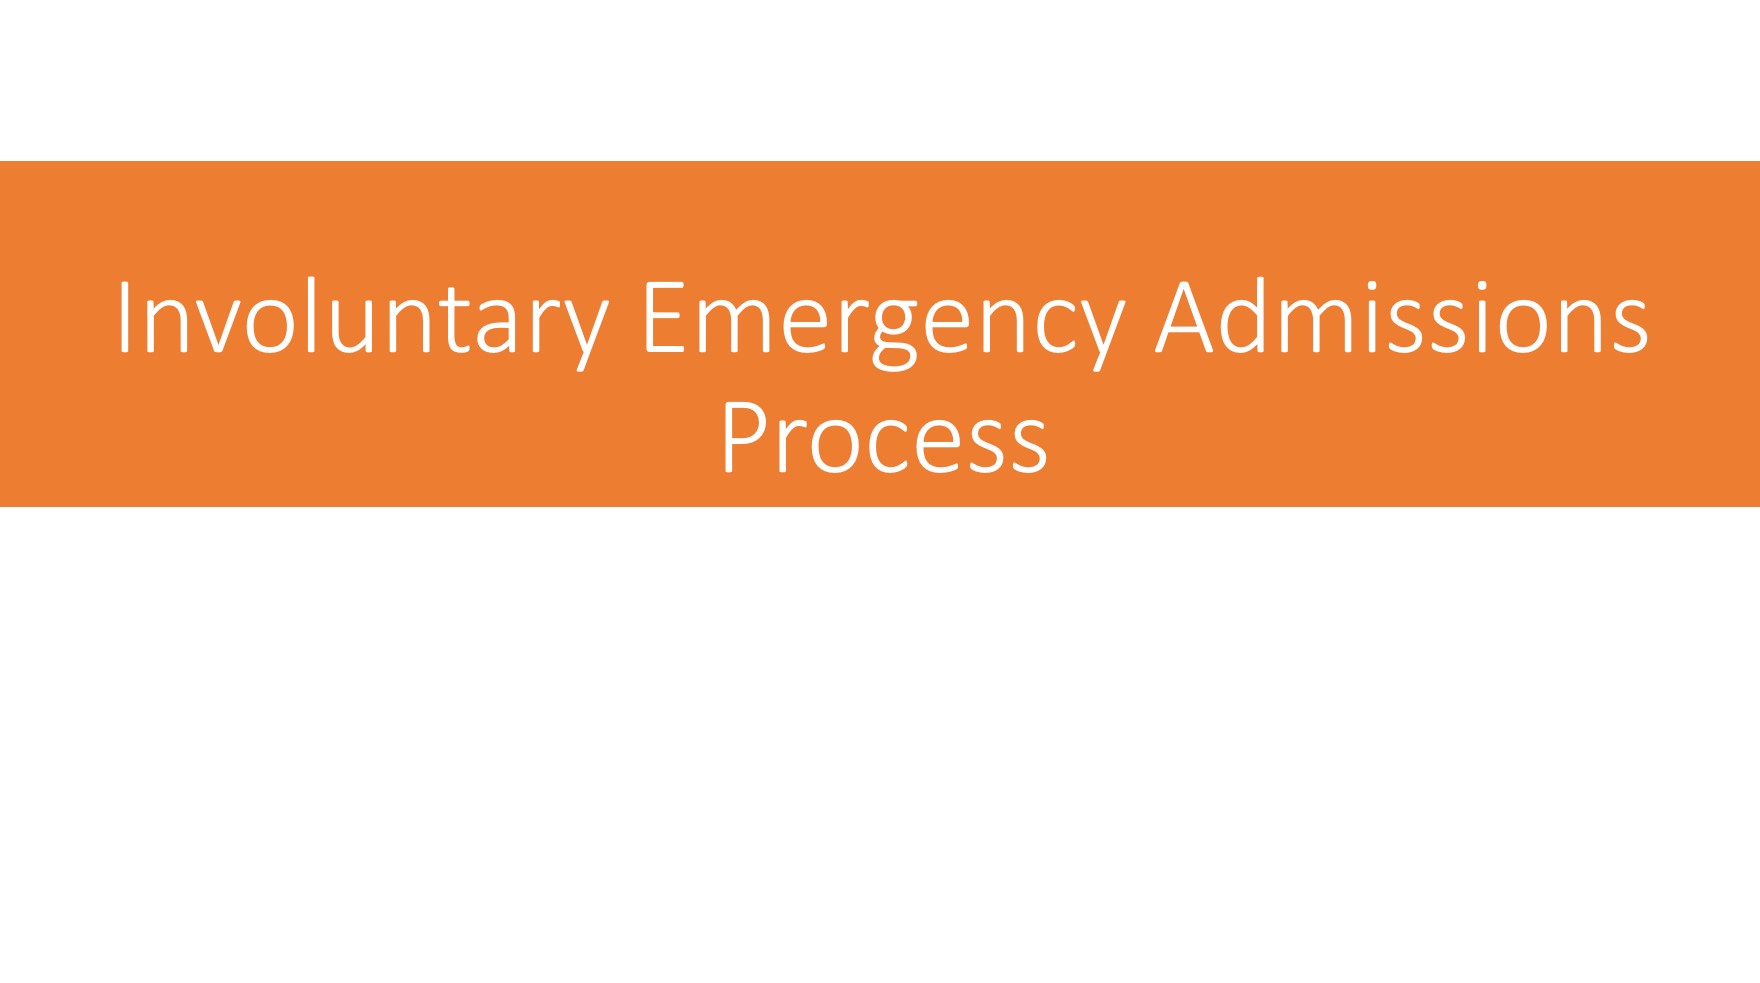 A powerpoint slide with text that reads "Involuntary Emergency Admissions Process" on an orange rectangle.